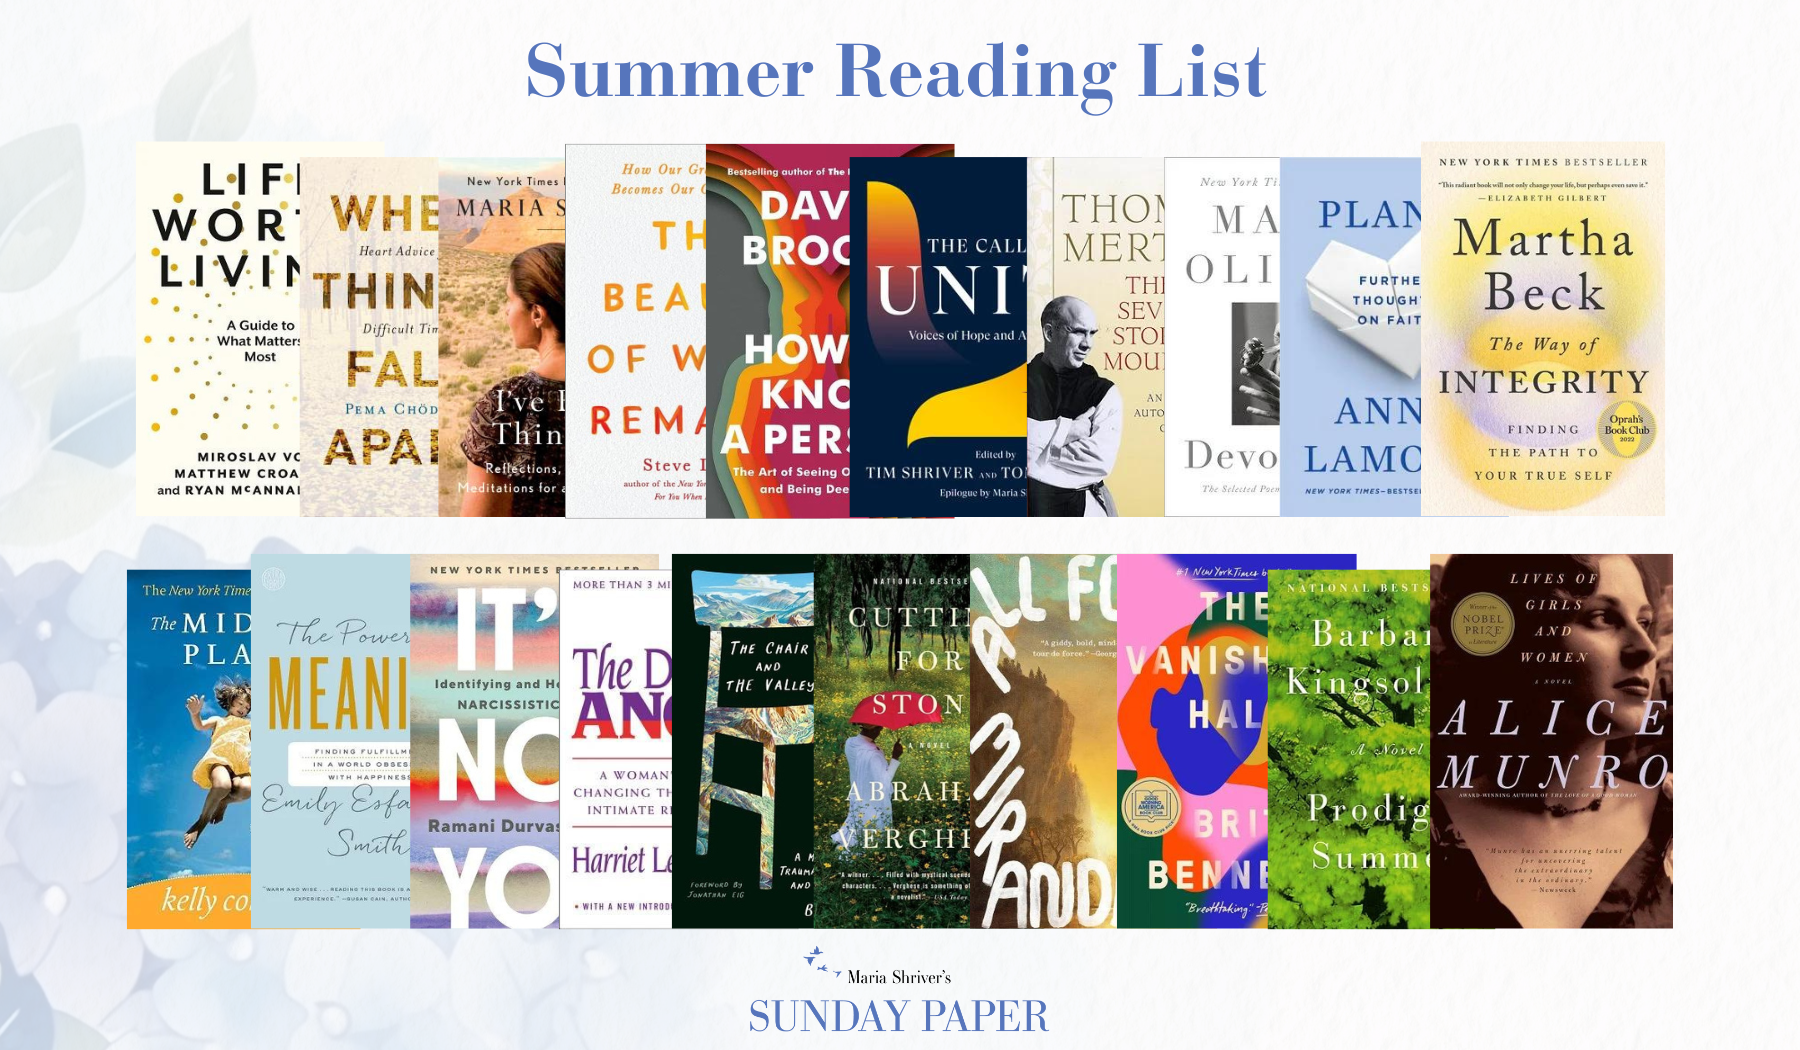 The Sunday Paper’s Summer Reading List